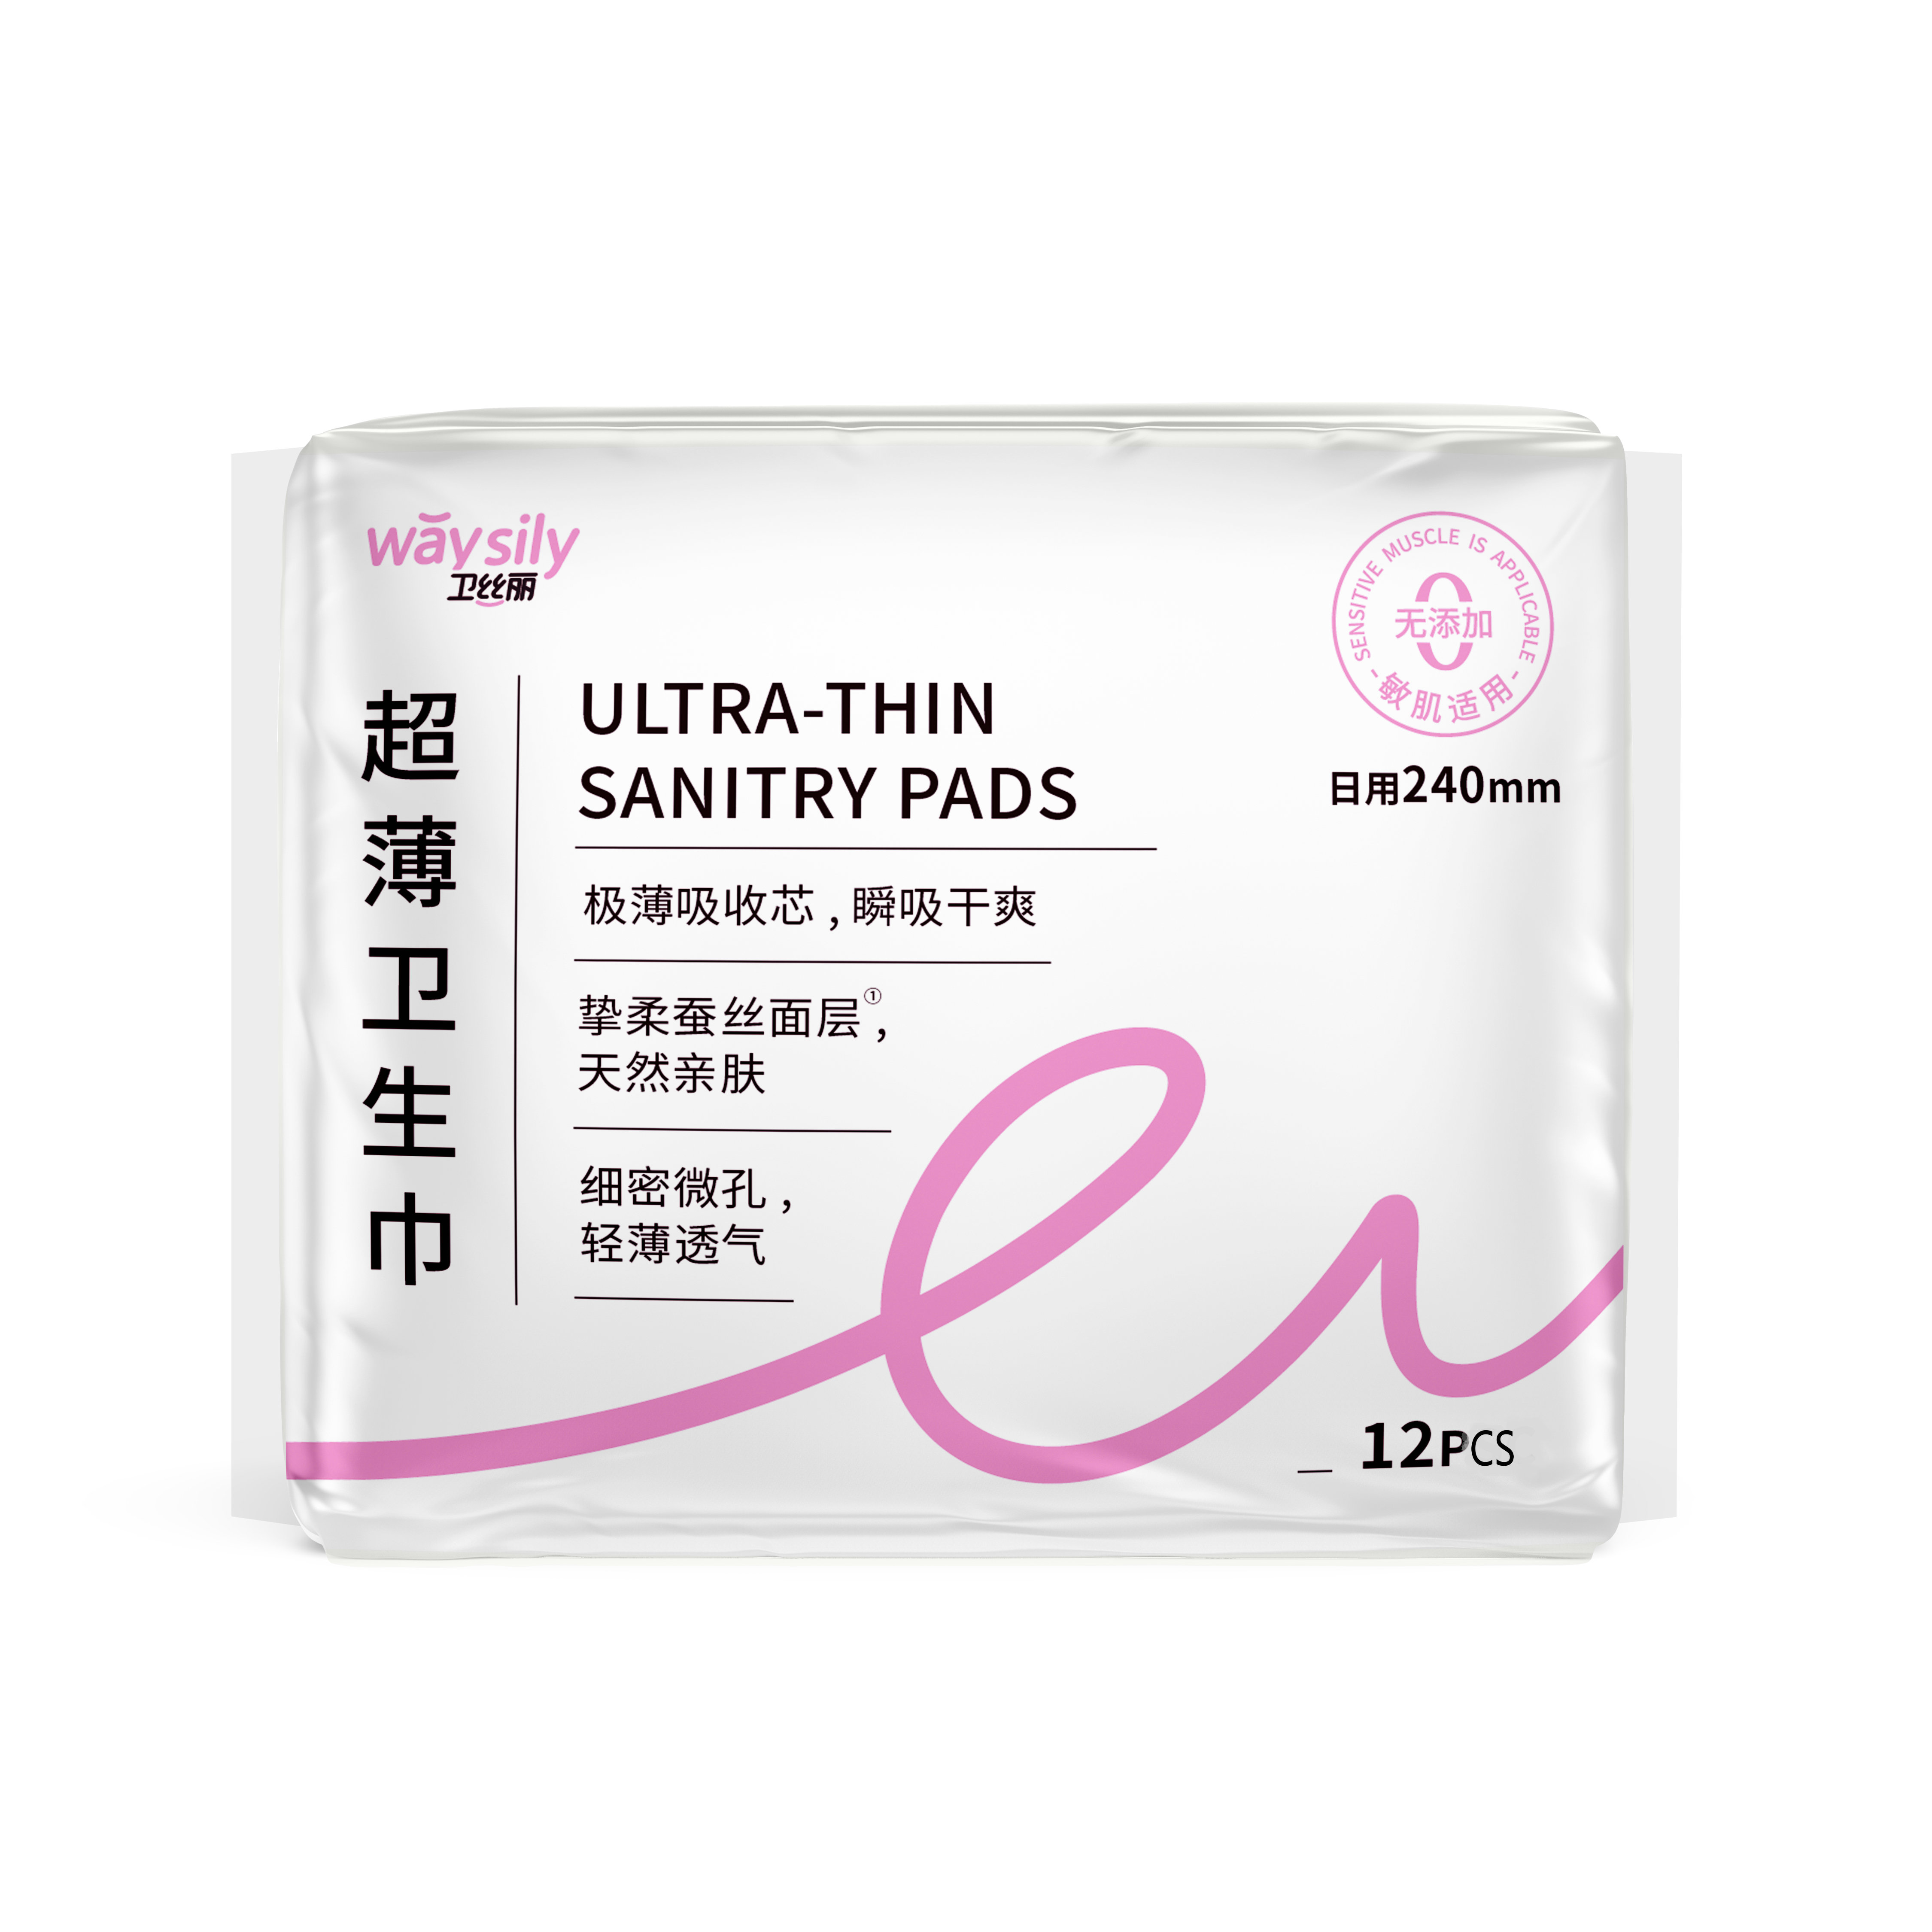 Product Introduction of Ultra-thin Sanitary Napkins